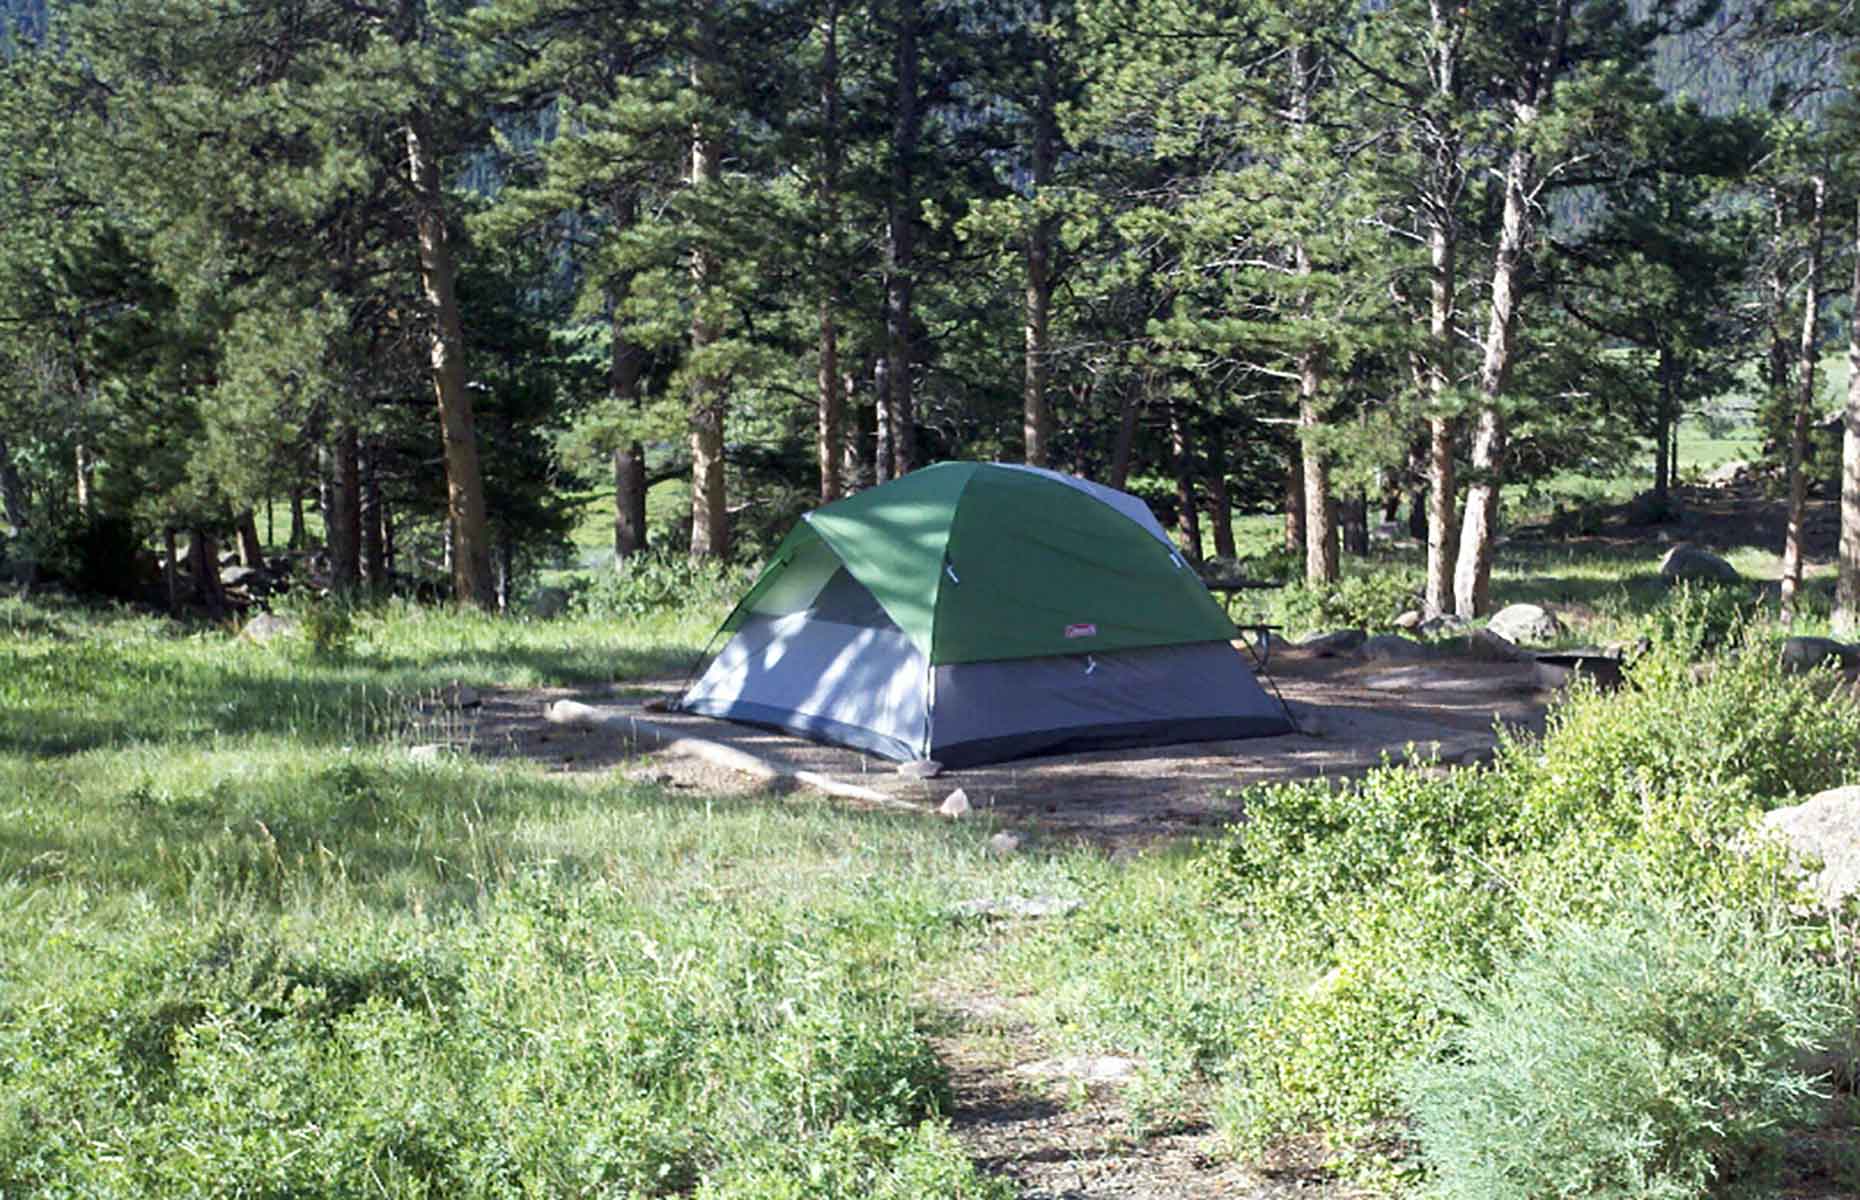 Moraine Park Campground, Rocky Mountain National Park (Image: Jasperdo/Flickr/CC BY-NC-ND 2.0)